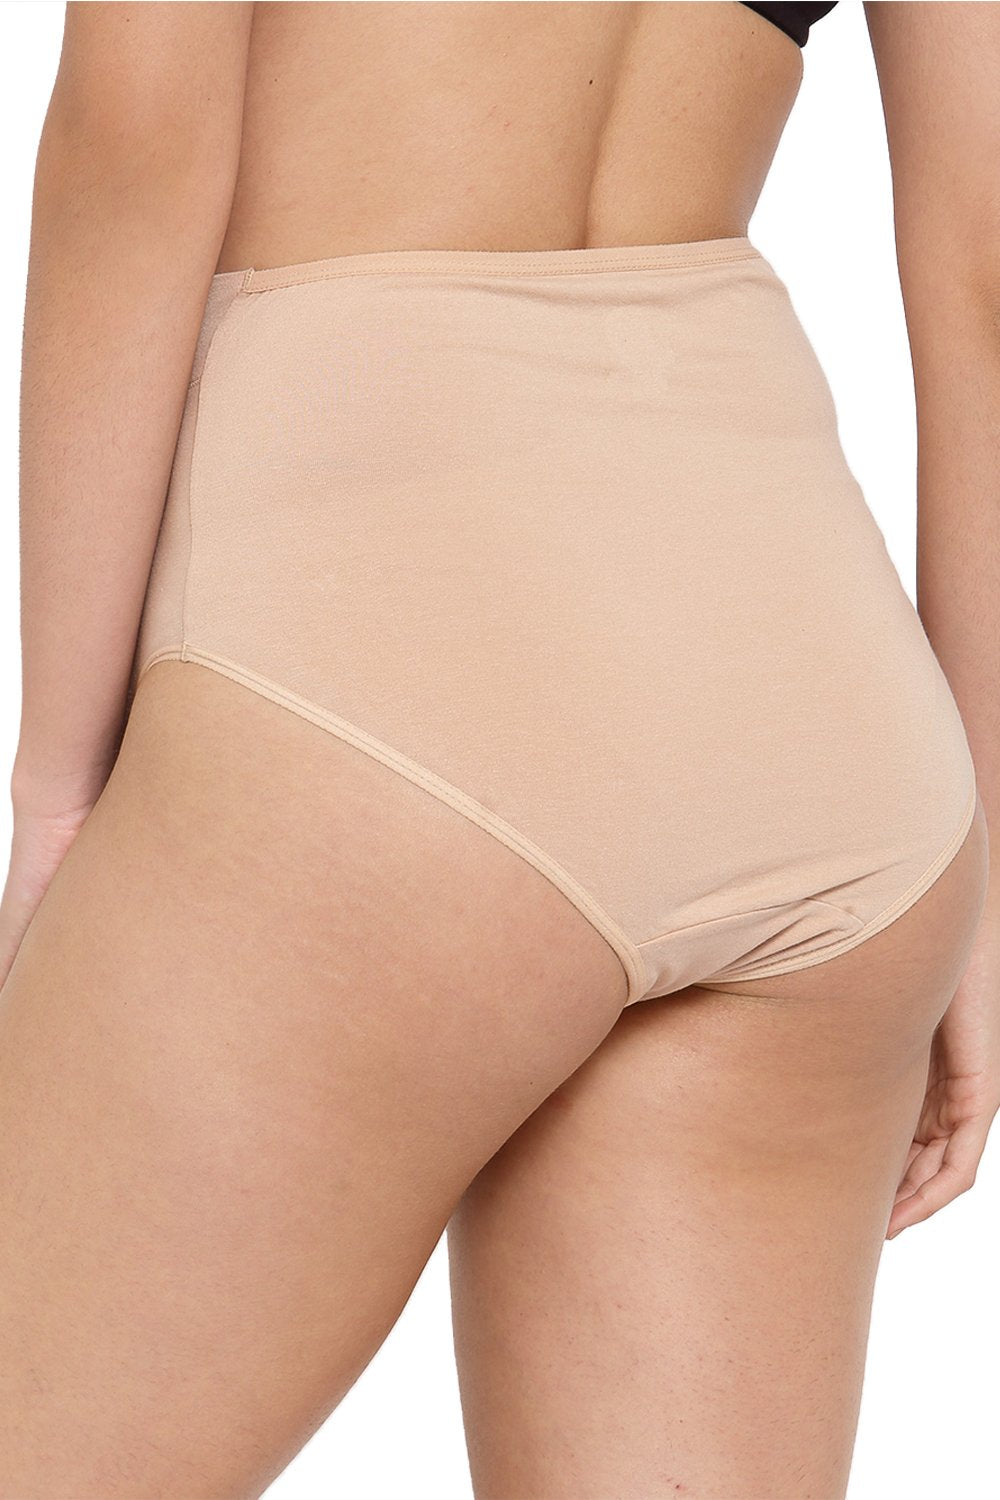 Inner Sense Organic Cotton Antimicrobial Maternity Panty - Pack of